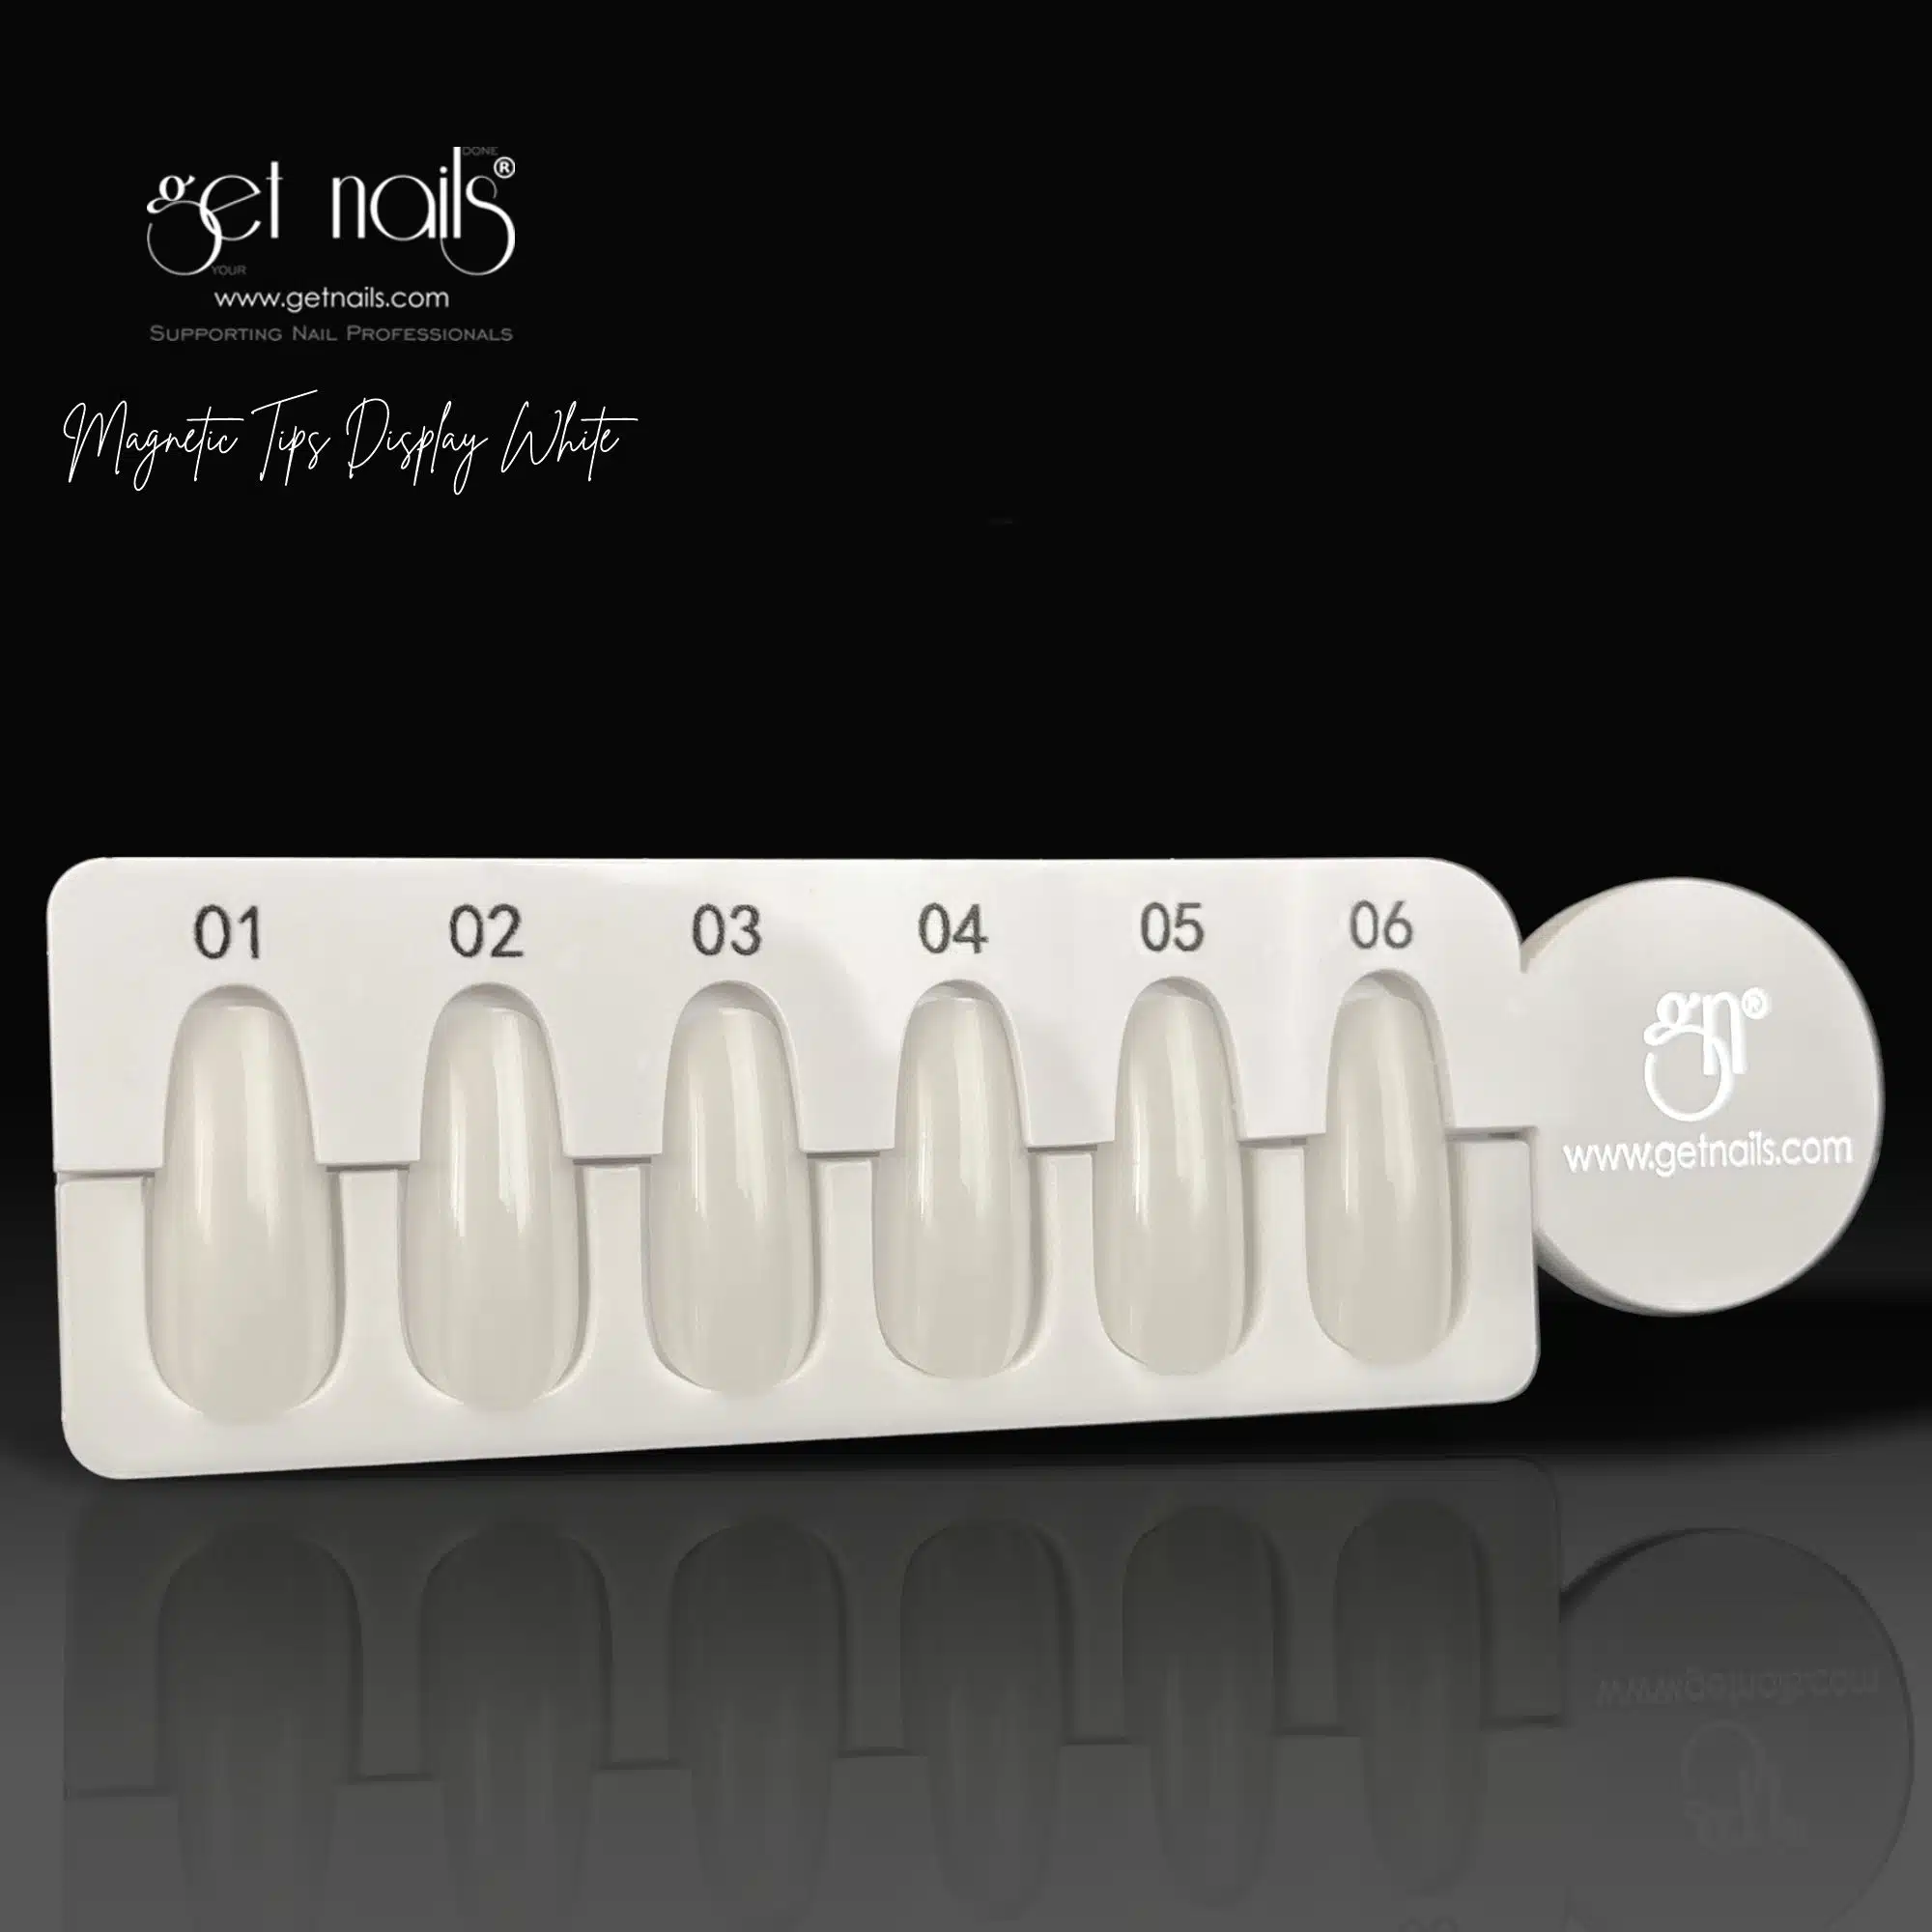 Get Nails Austria - Magnetic Tips Display White